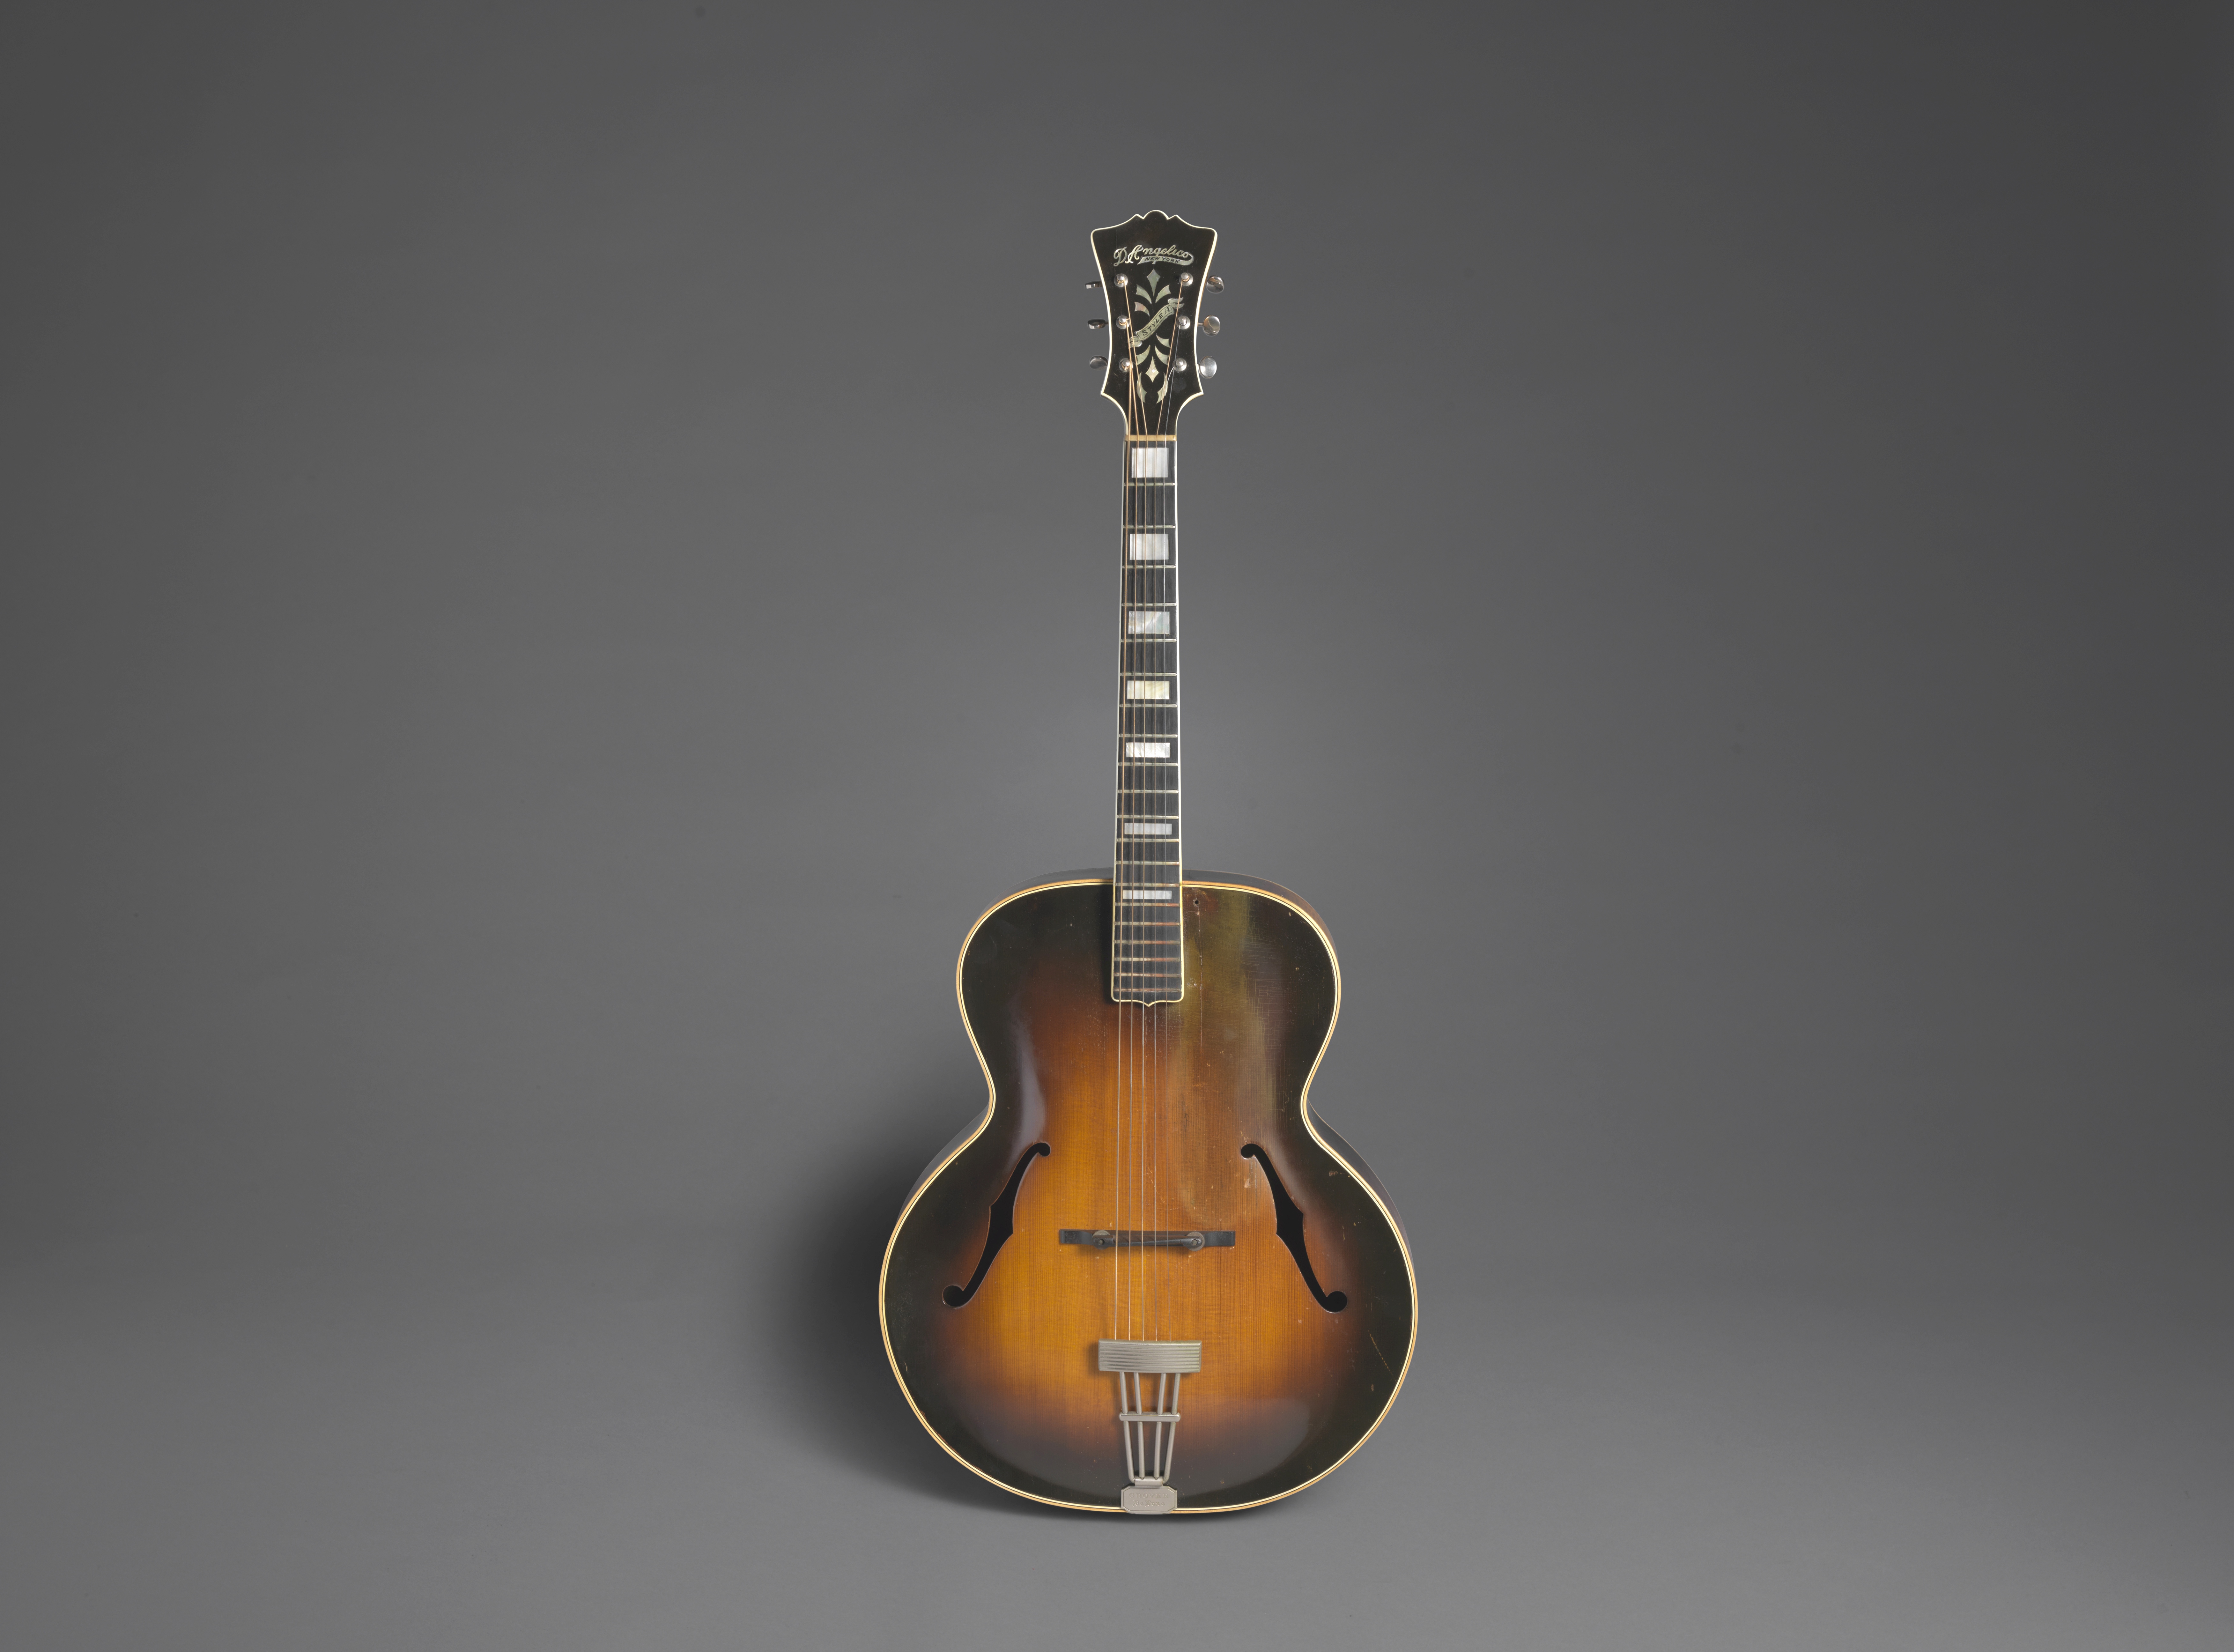 A D'ANGELICO STYLE A ARCHTOP ACOUSTIC GUITAR OWNED AND PLAYED BY JERRY GARCIA